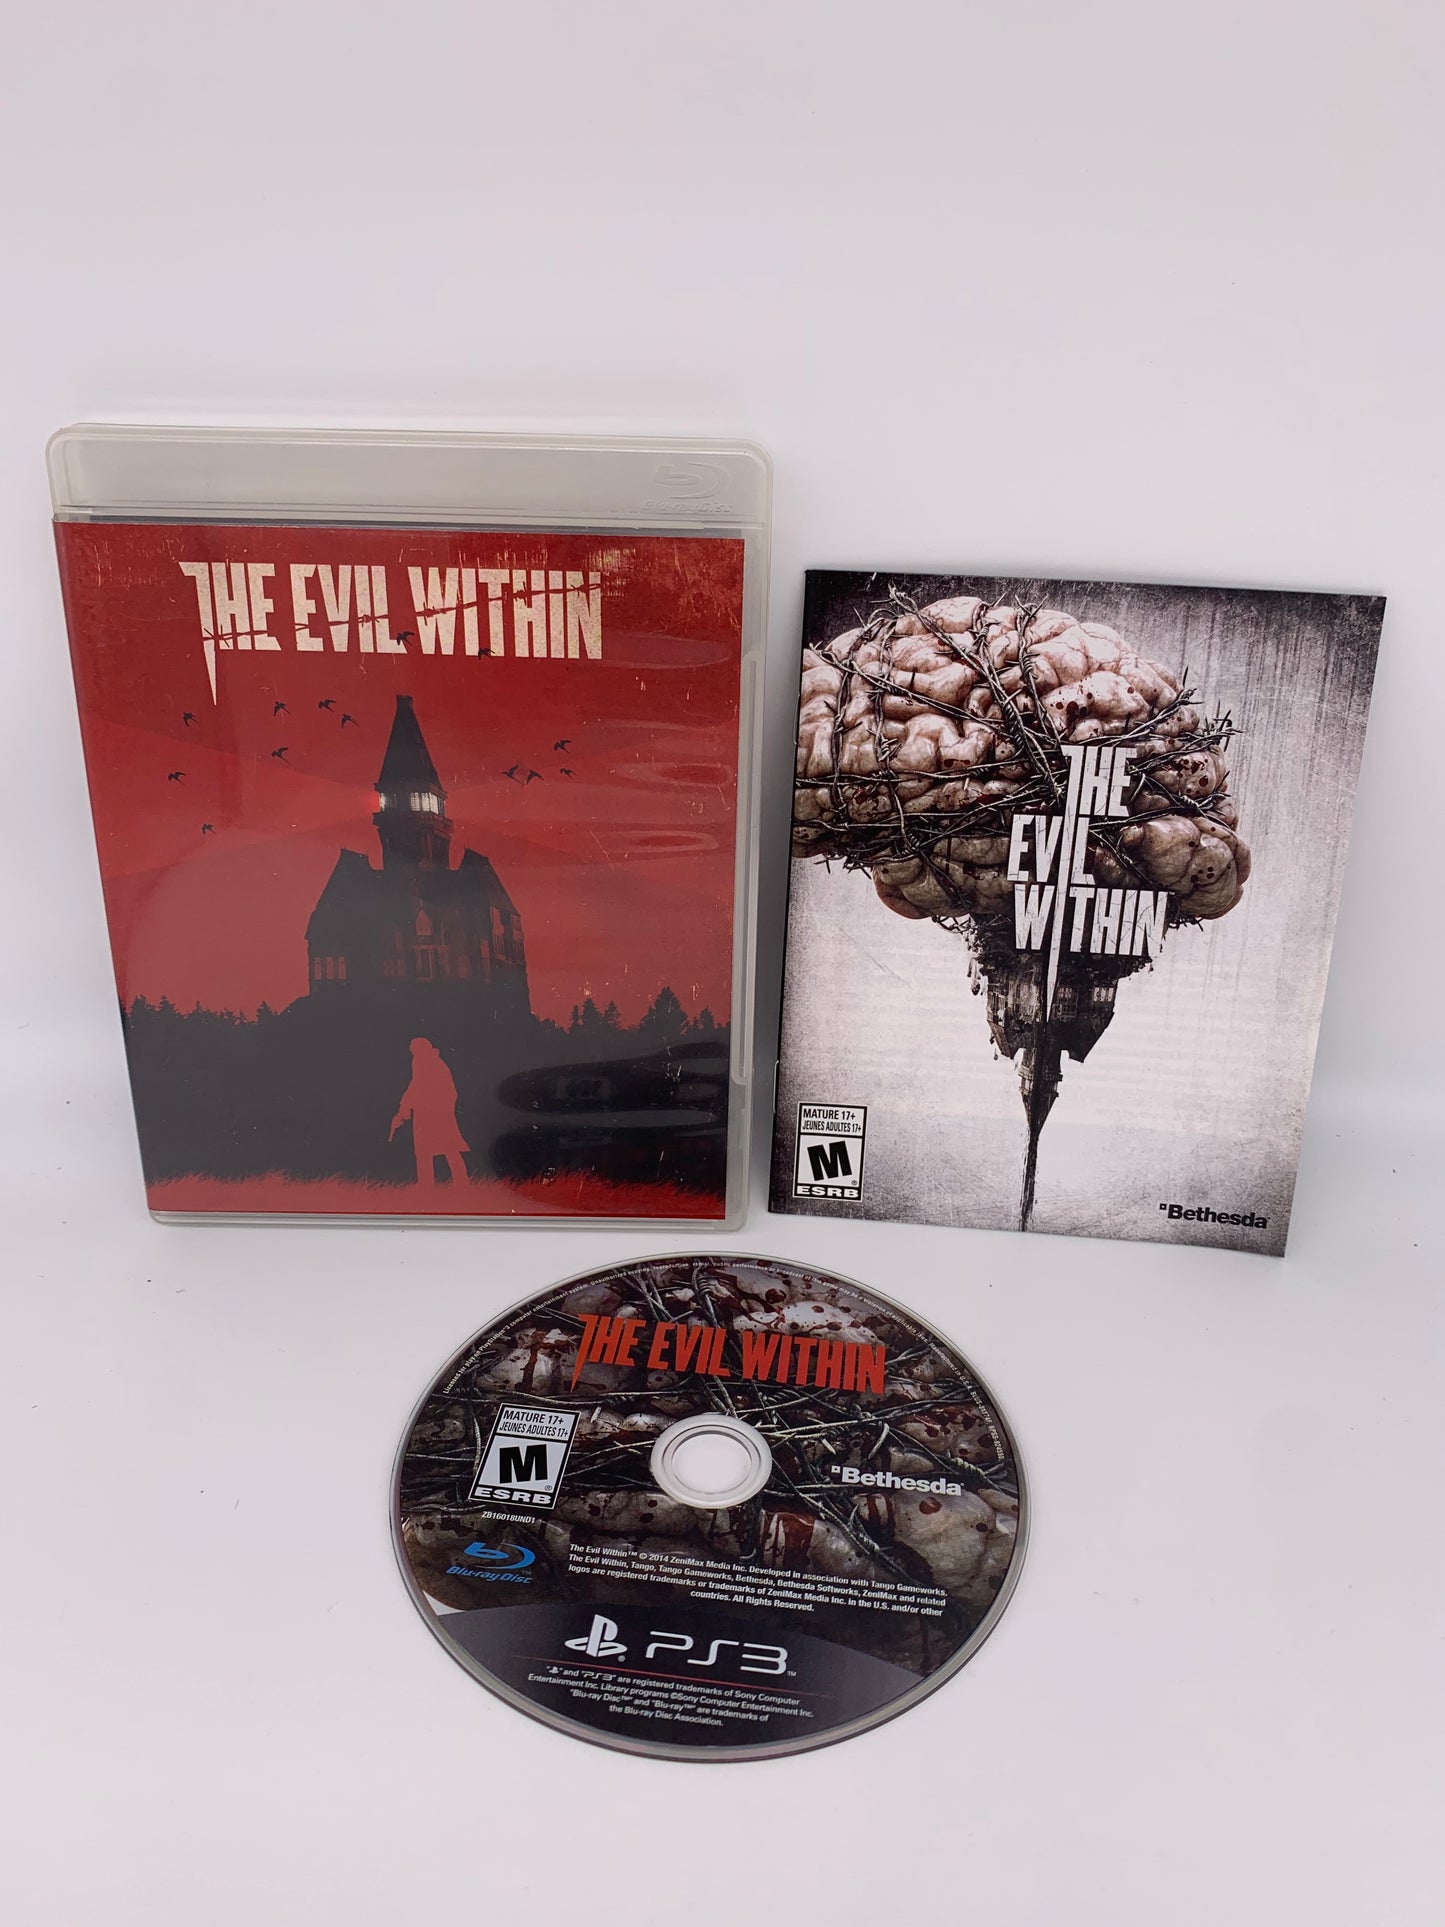 PiXEL-RETRO.COM : SONY PLAYSTATION 3 (PS3) COMPLET CIB BOX MANUAL GAME NTSC THE EVIL WITHIN